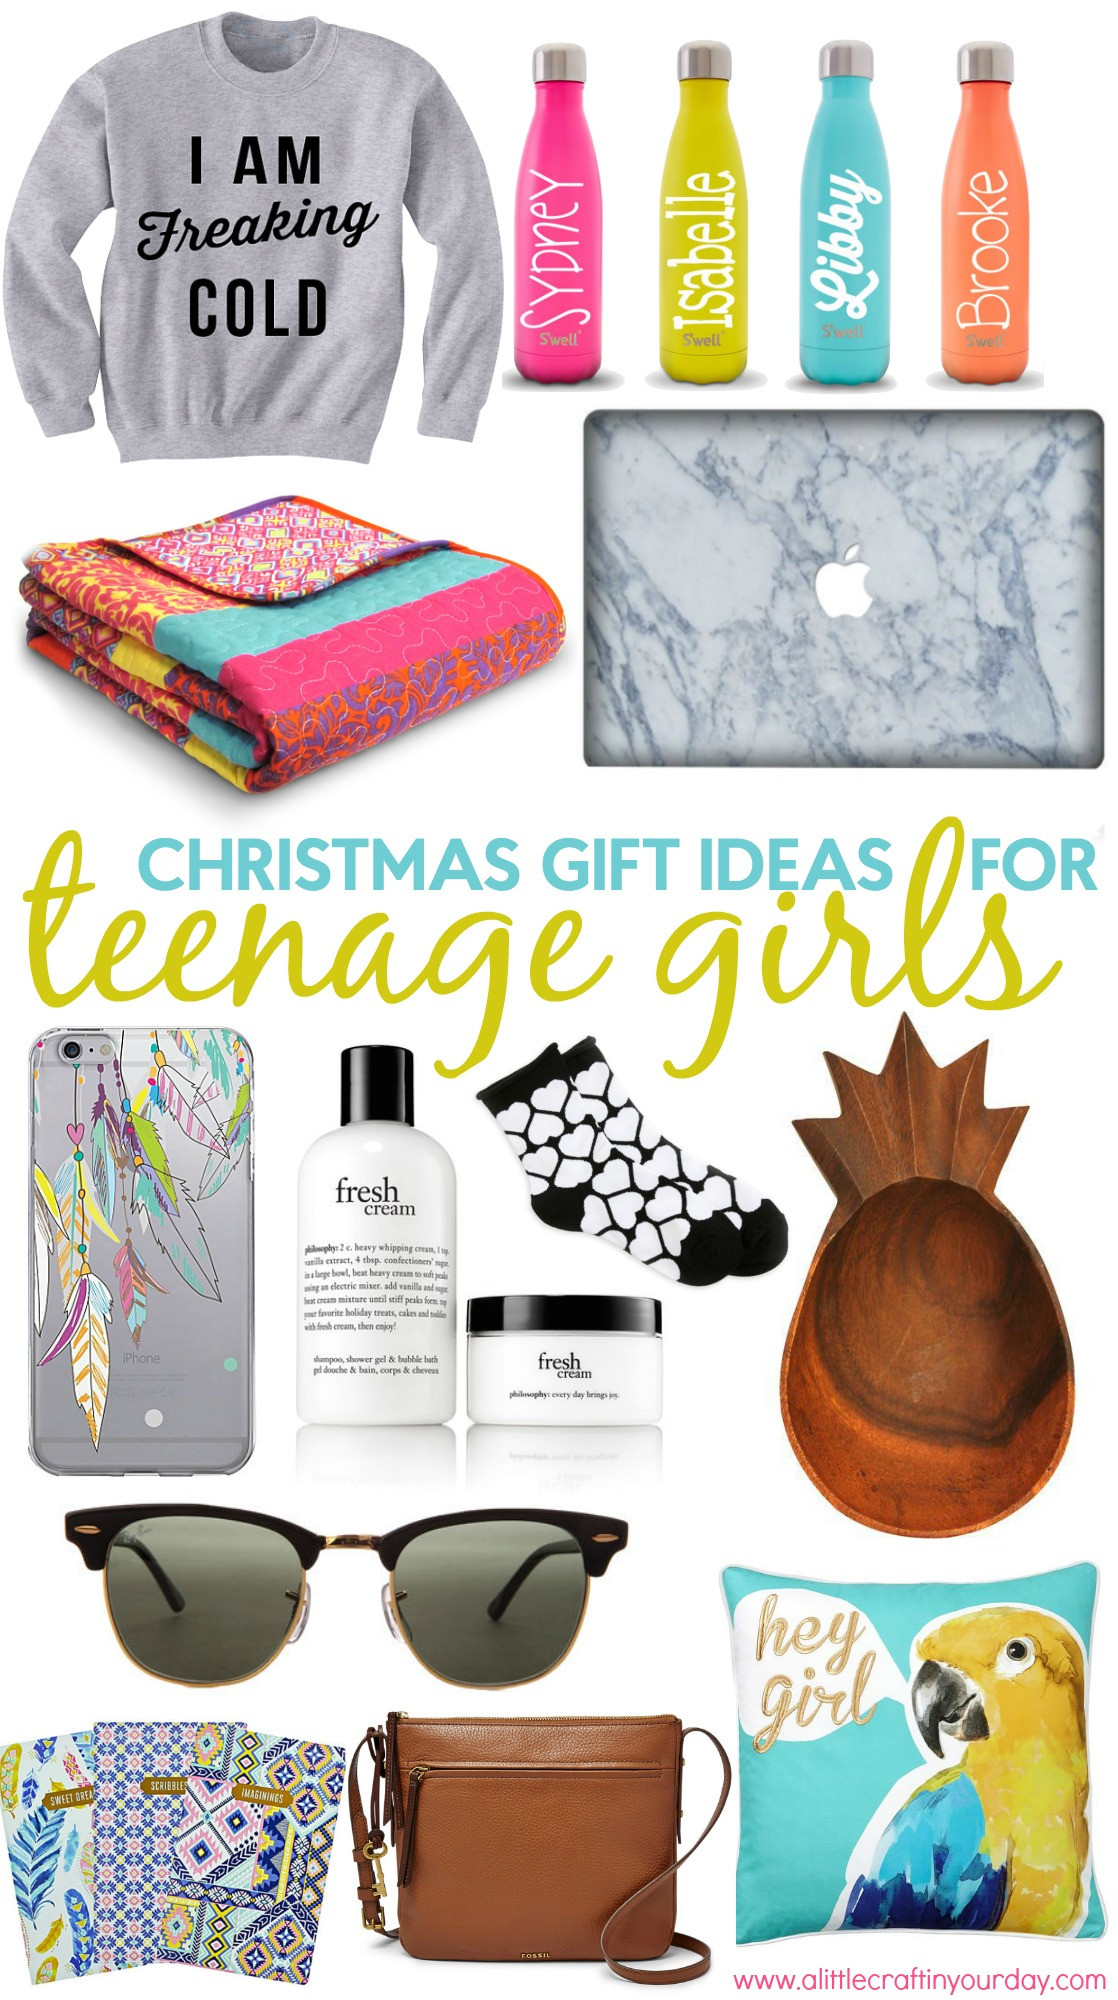 Top Gift Ideas For Teen Girls
 Christmas Gift Ideas for Teen Girls A Little Craft In